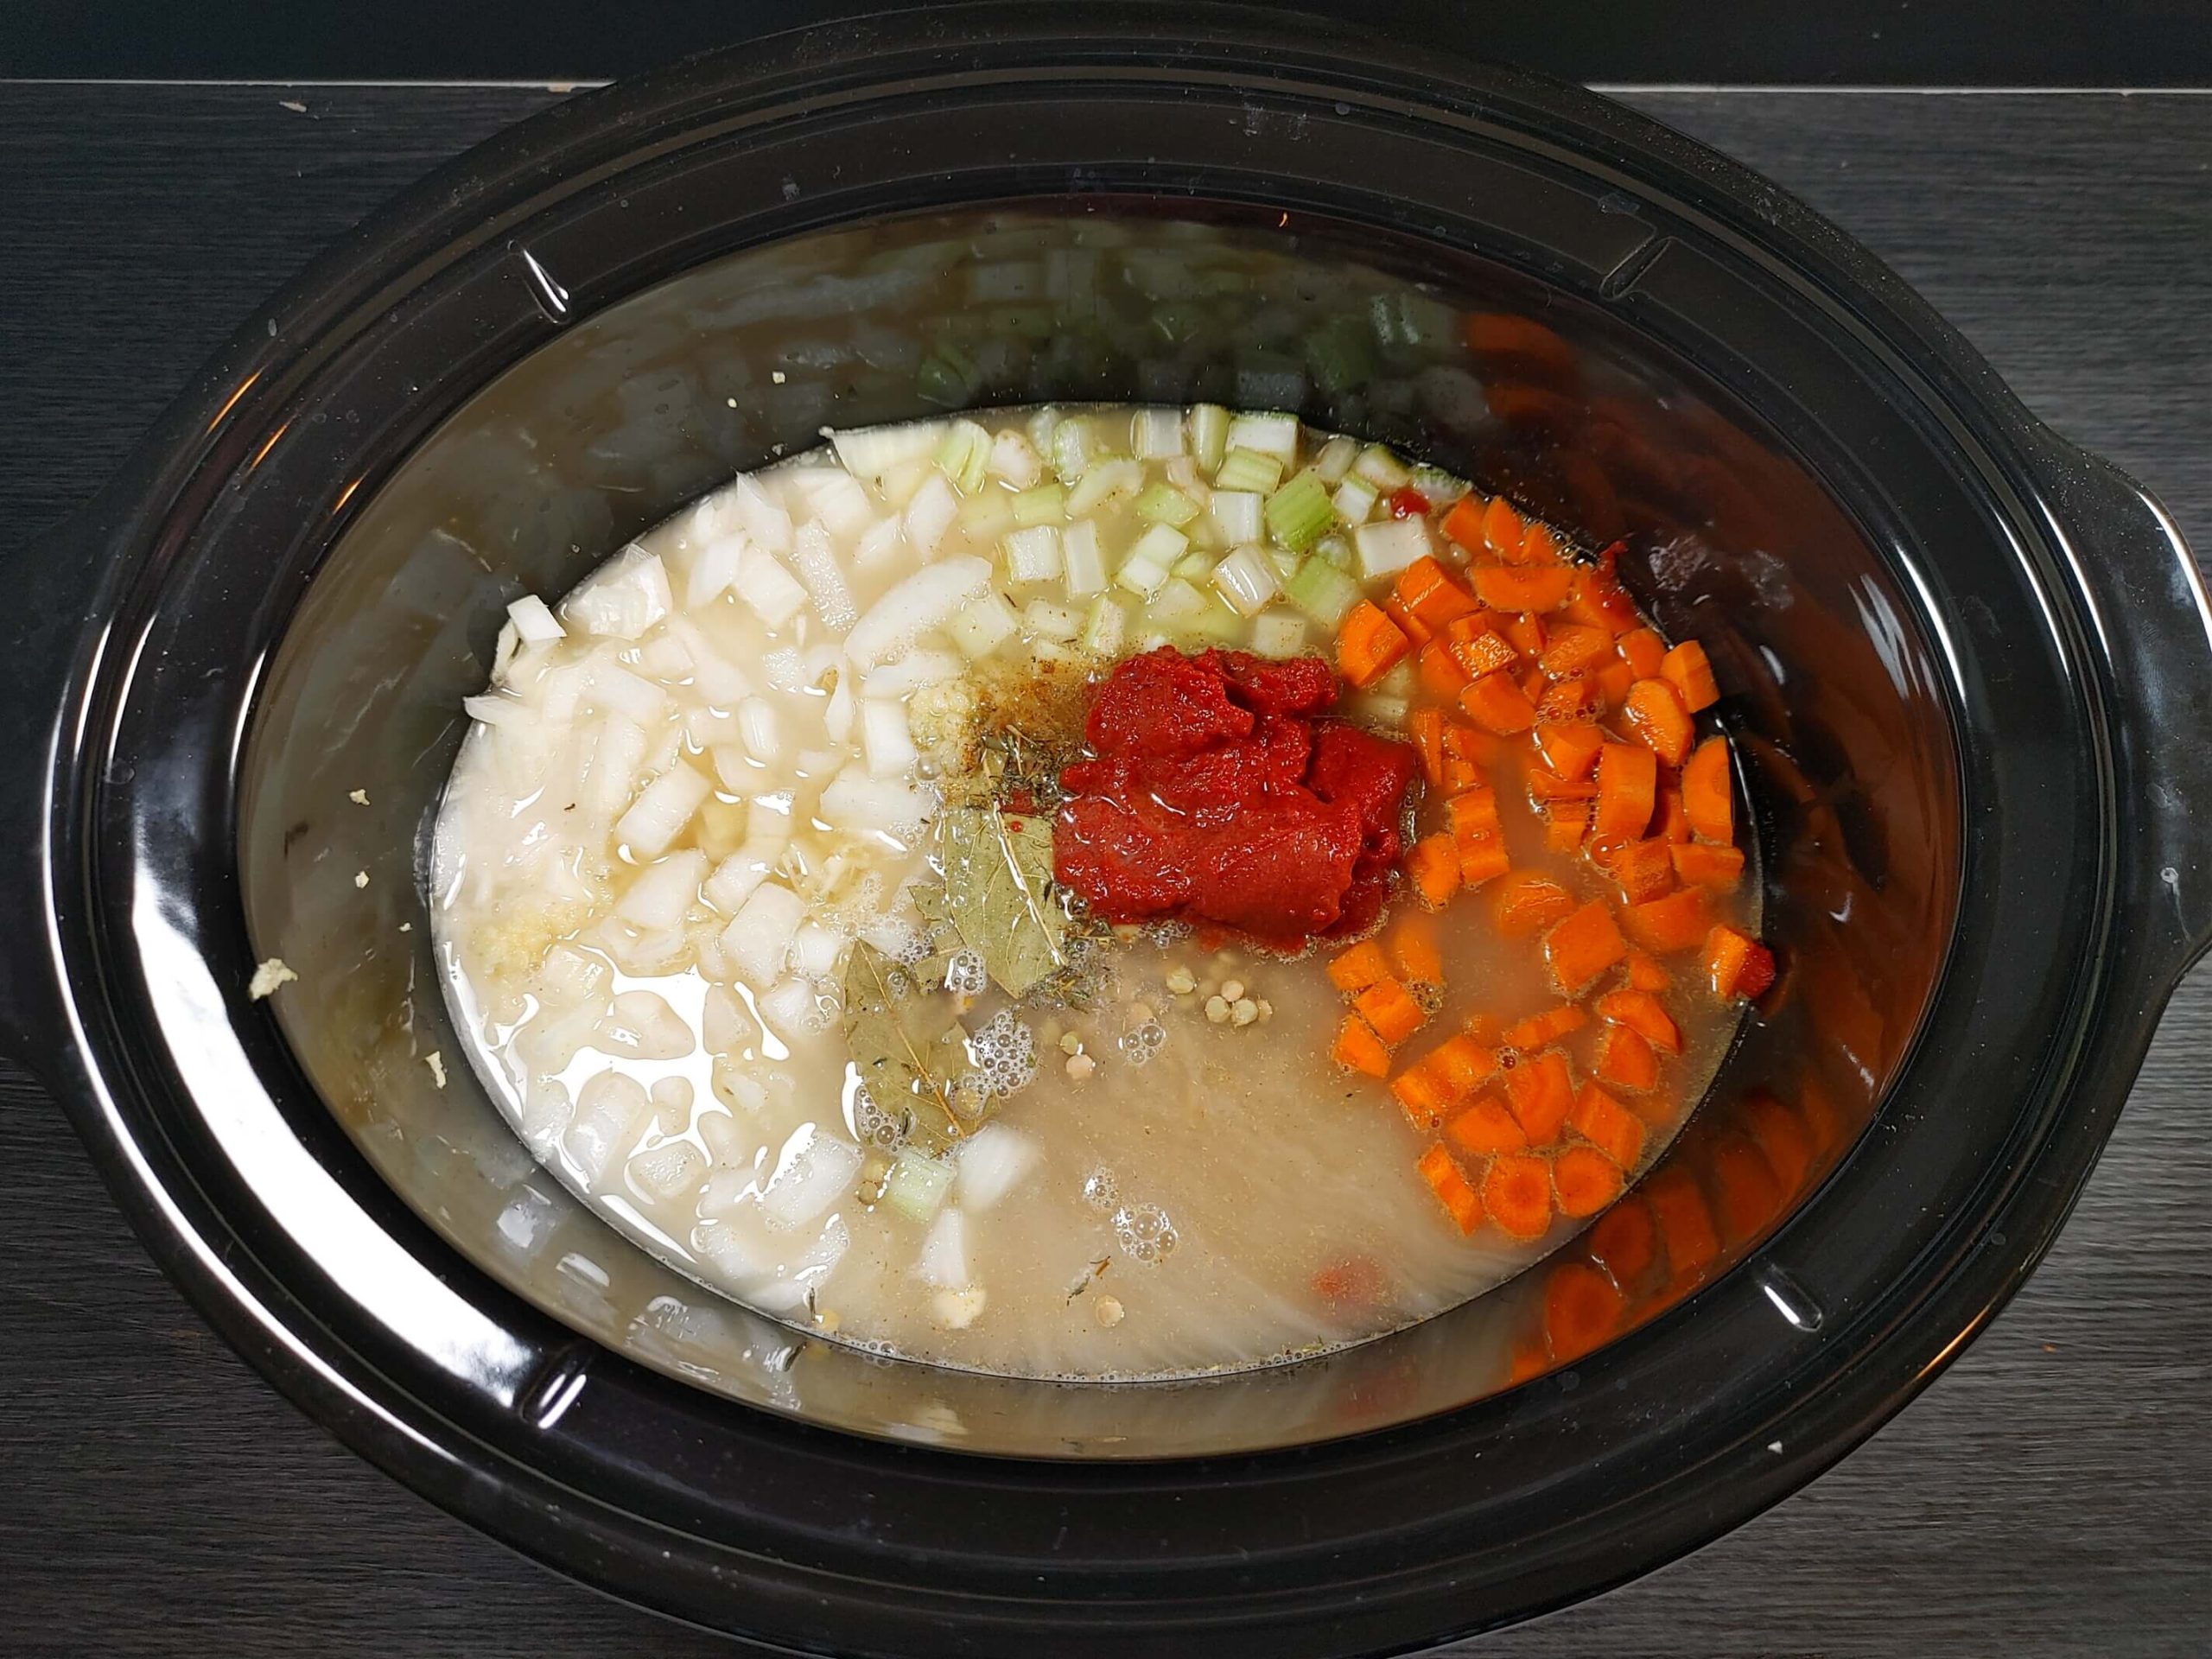 ADD ALL INGREDIENTS TO THE CROCKPOT